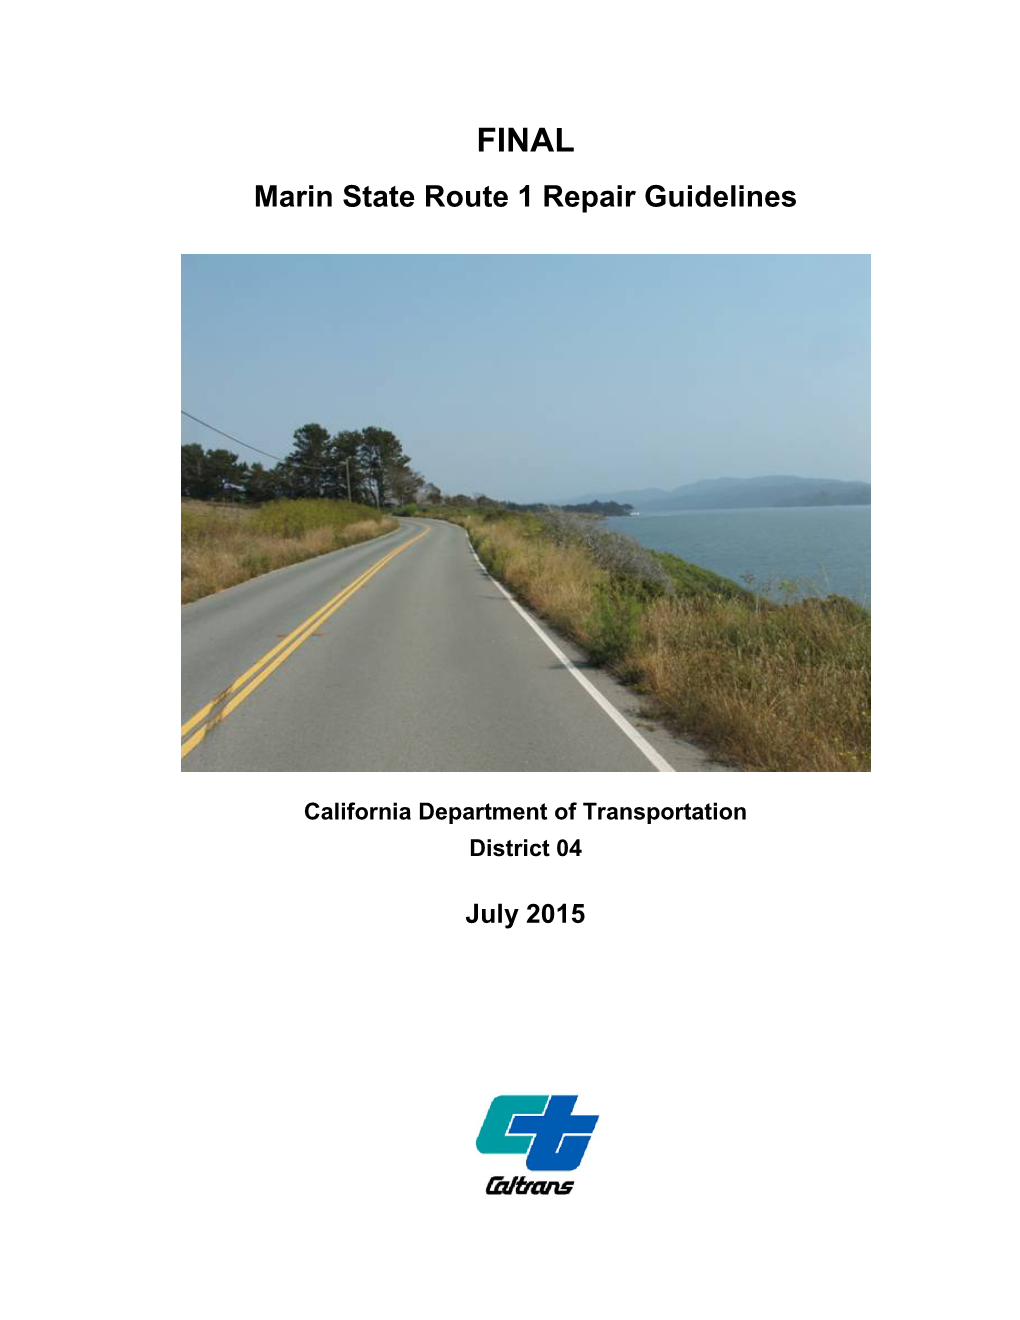 Marin State Route 1 Repair Guidelines (PDF)